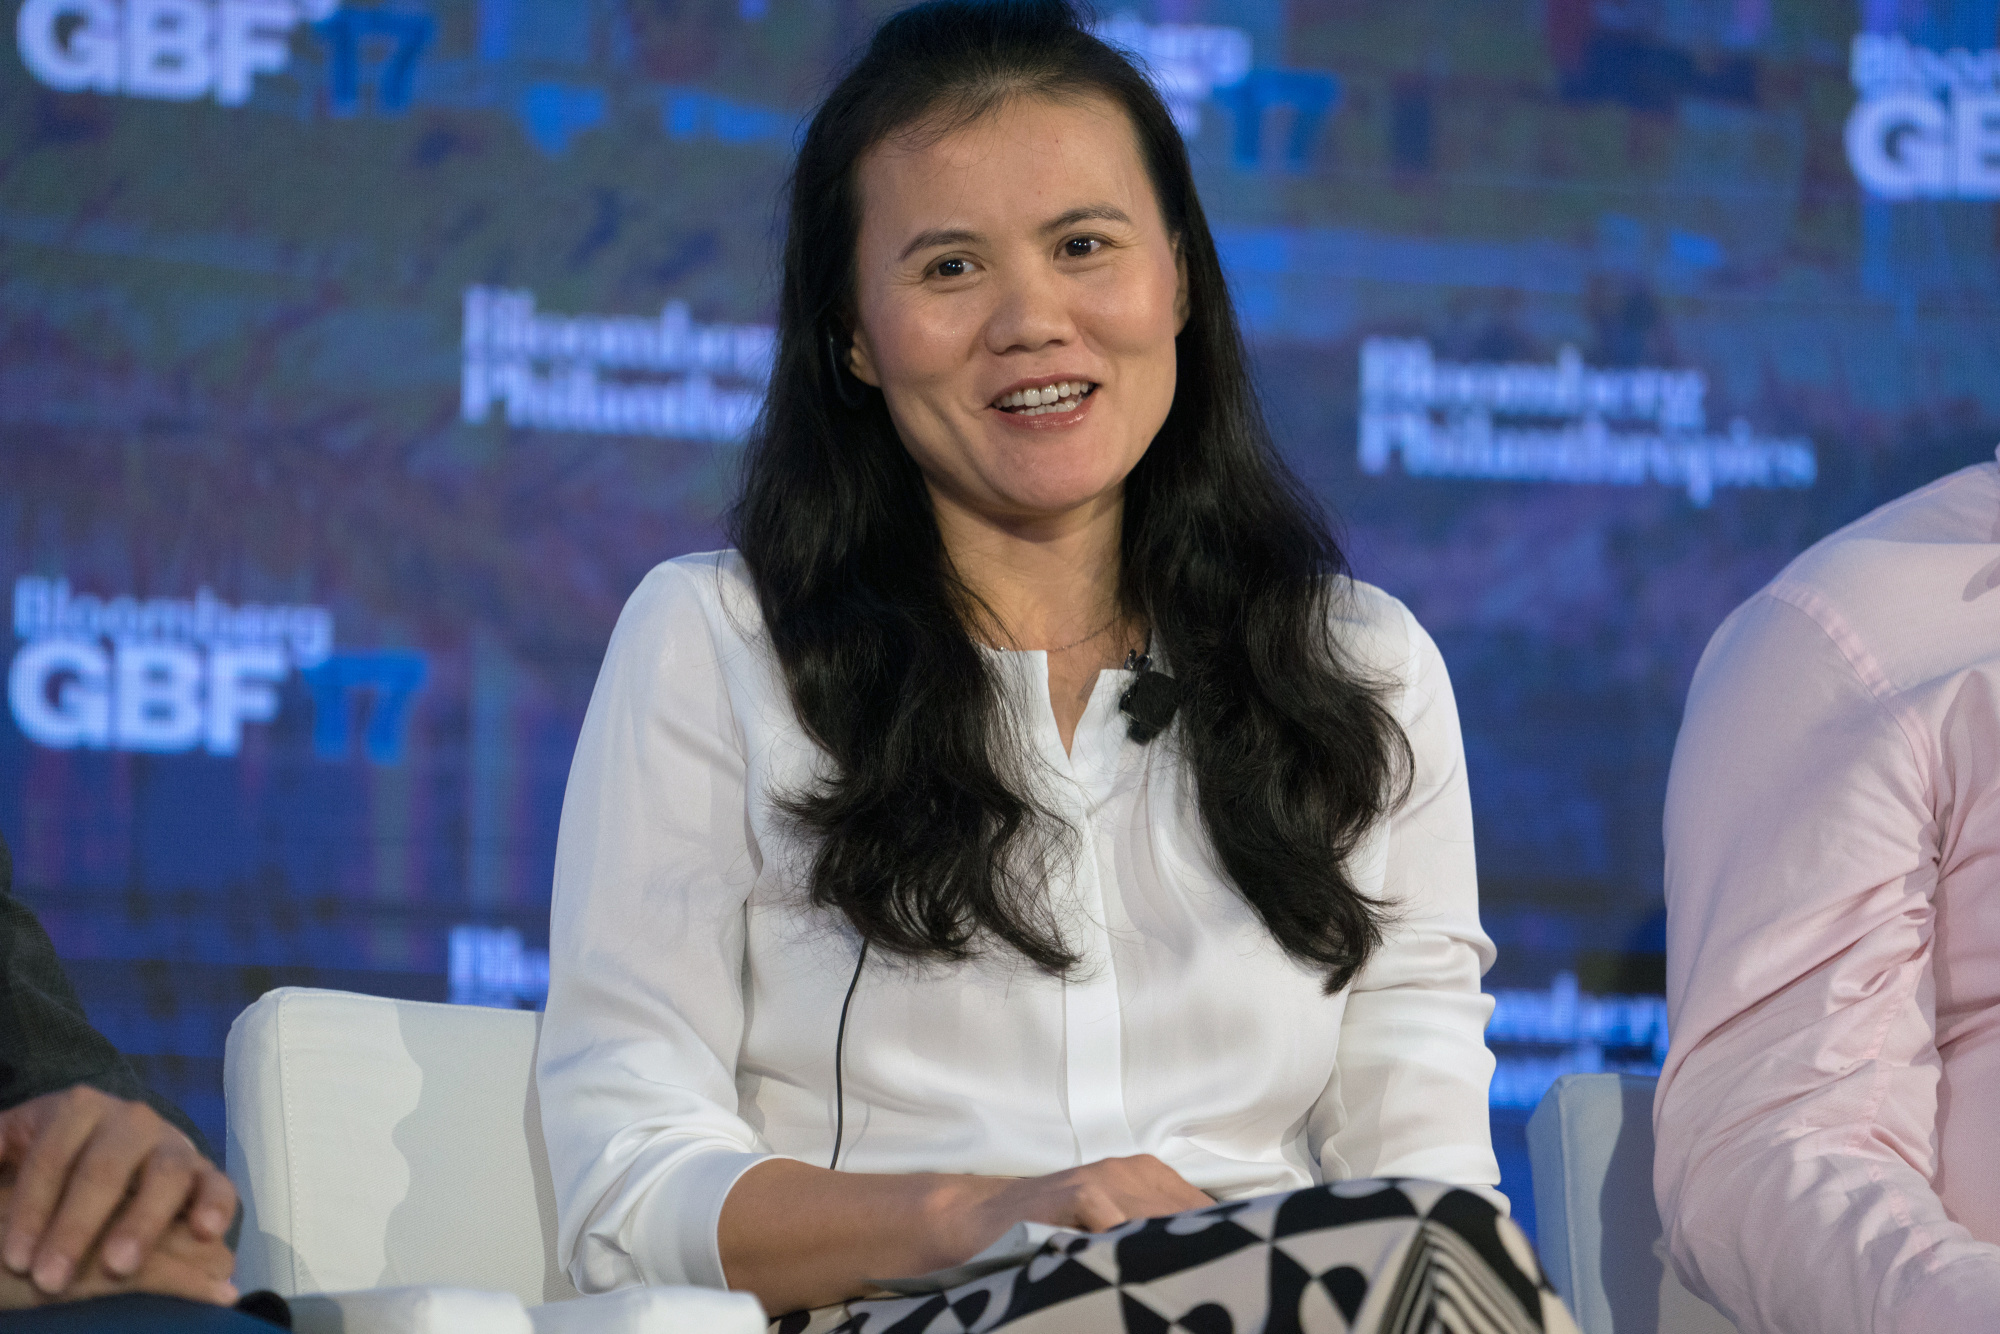 The former finance teacher is emerging as one of the wealthiest people within the Alibaba ecosystem and one of the world’s richest women.